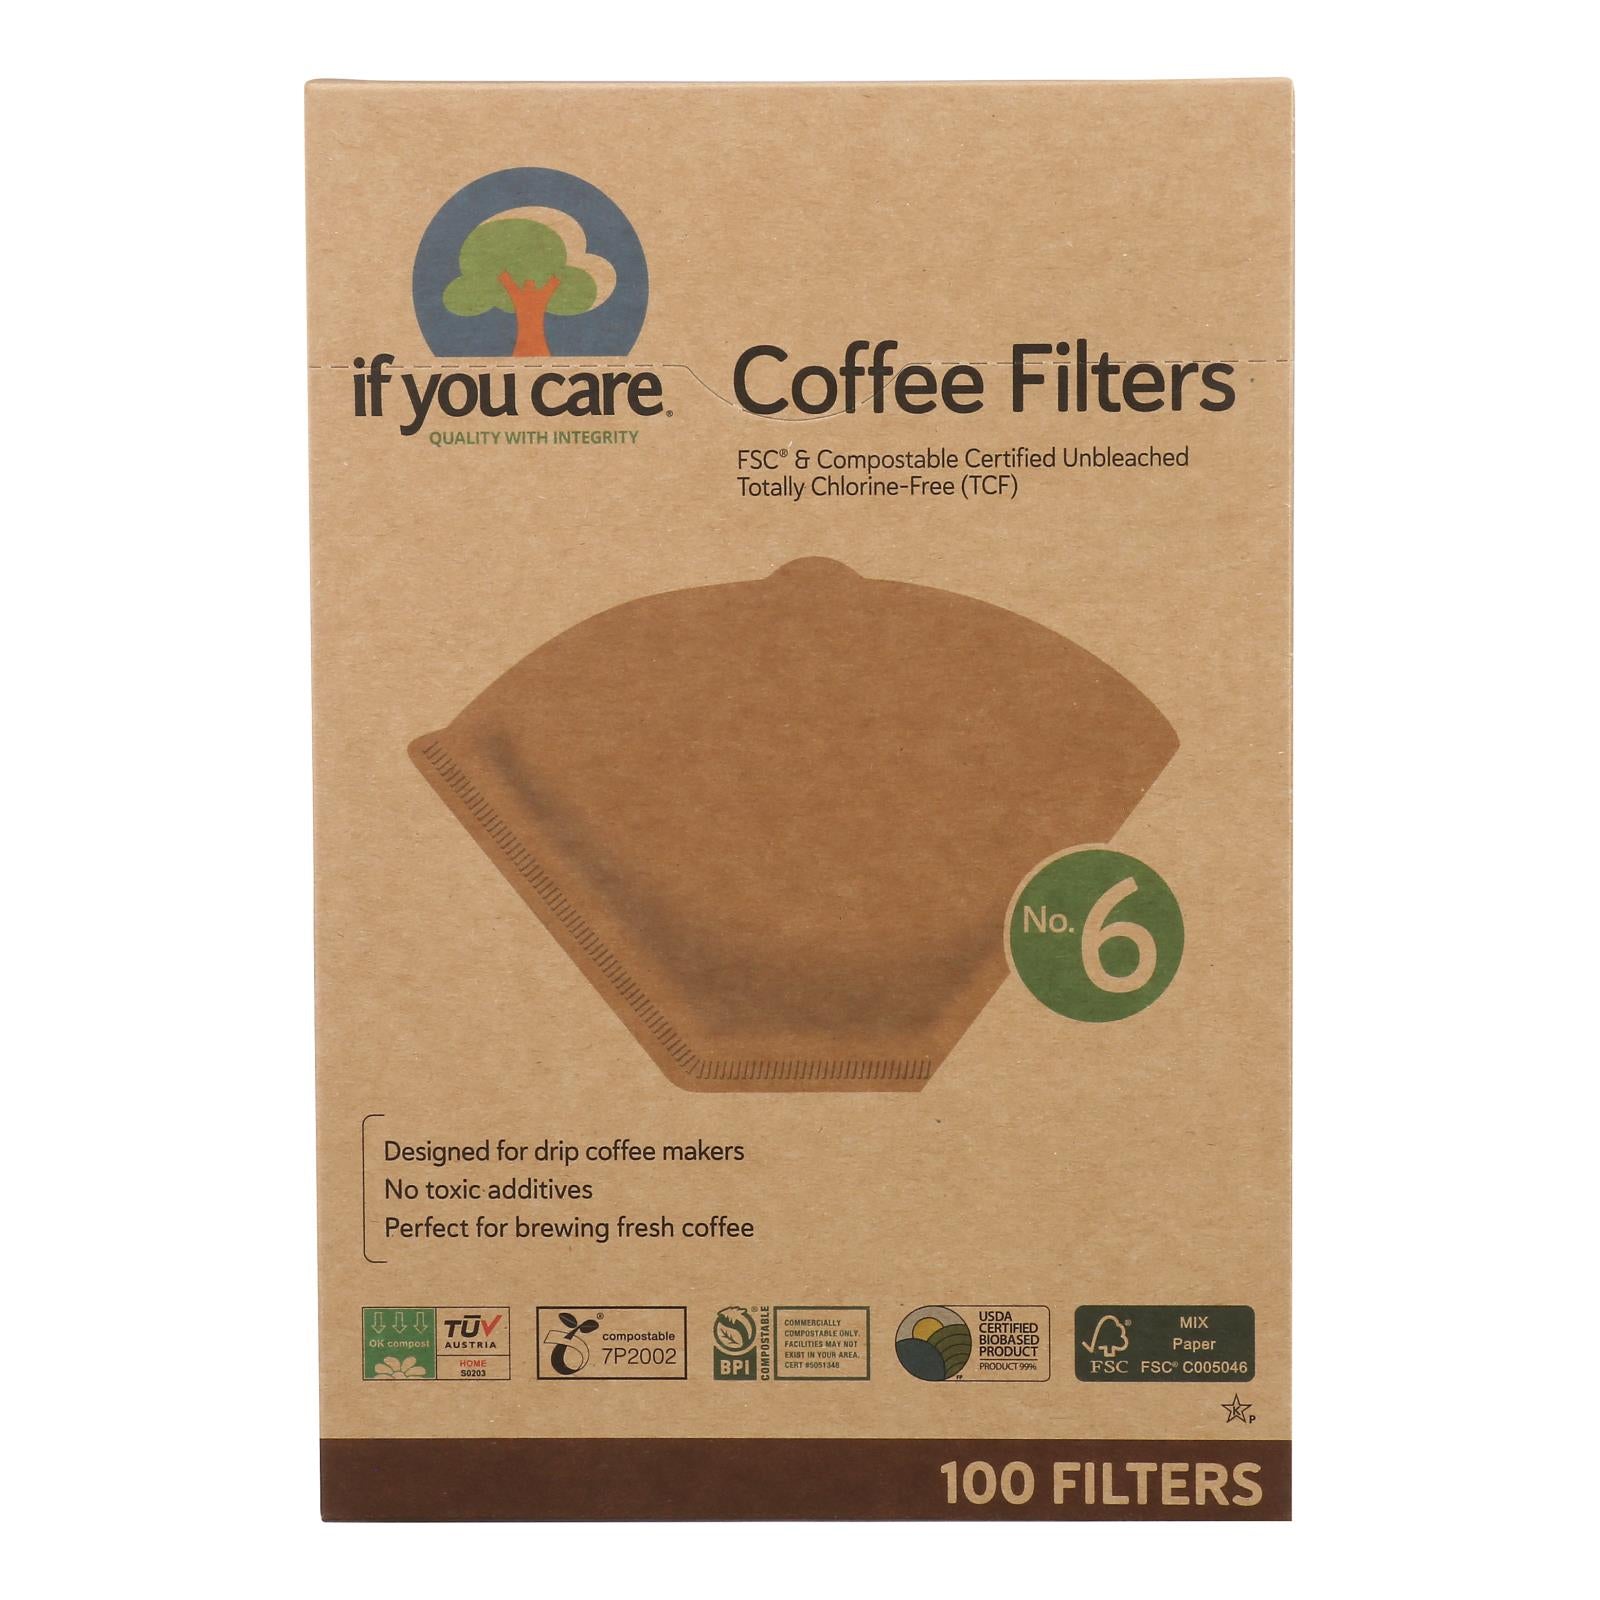 If You Care Coffee Filters Lbs.6 Cone Unbleached - Case Of 12 - 100 Count